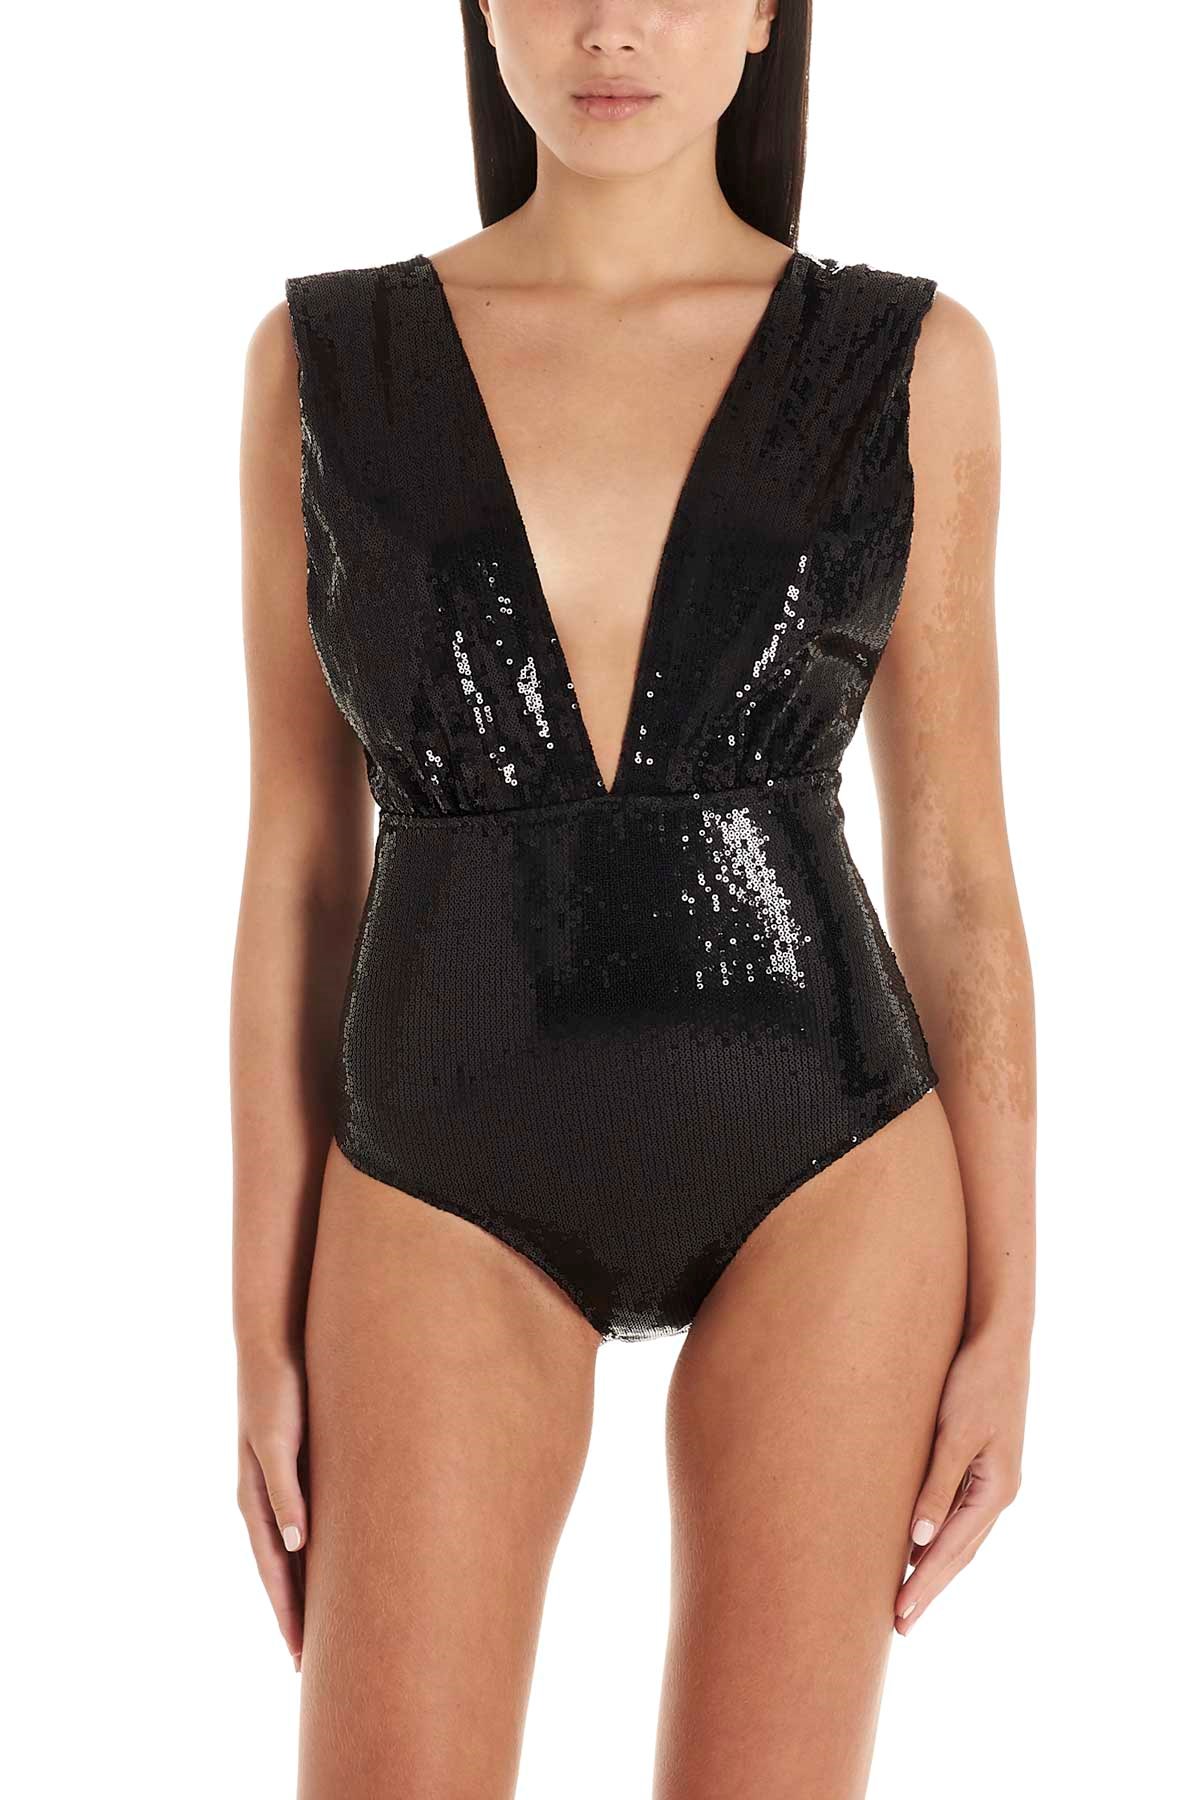 IN THE MOOD FOR LOVE 'Prince' Swimsuits